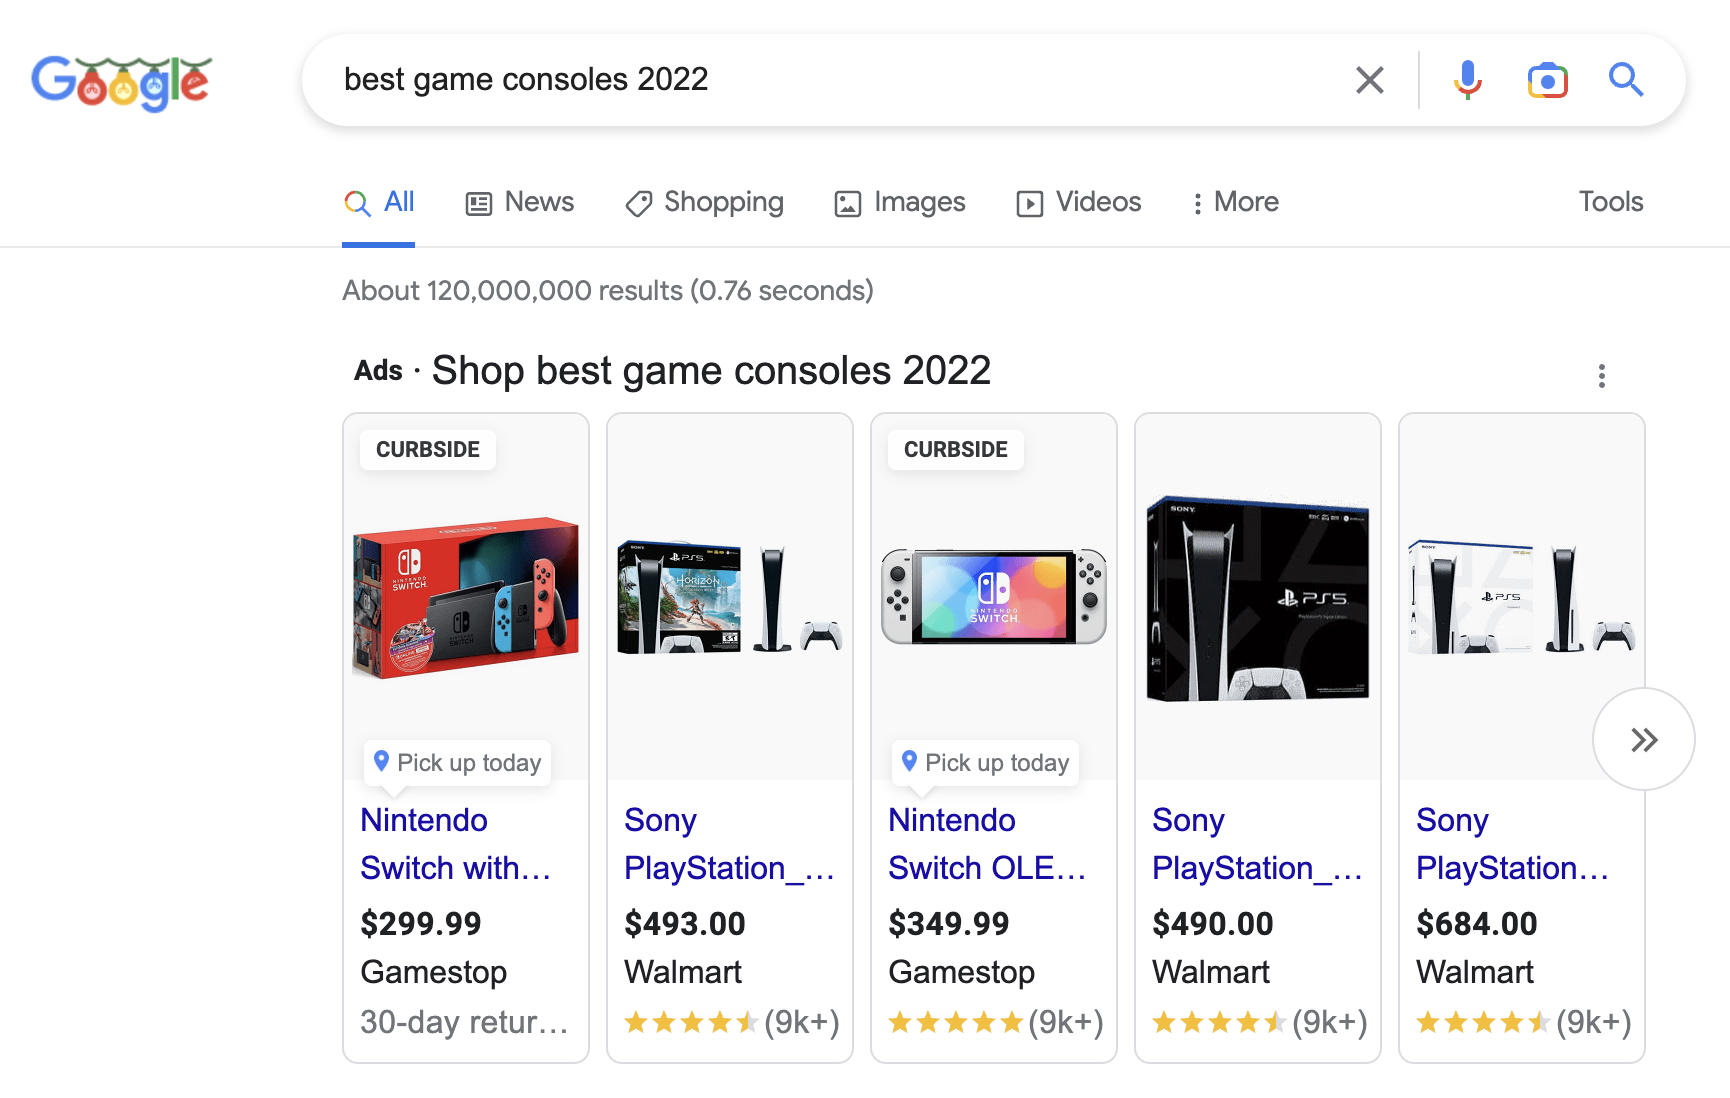 Google Search for Best Game Consoles 2022